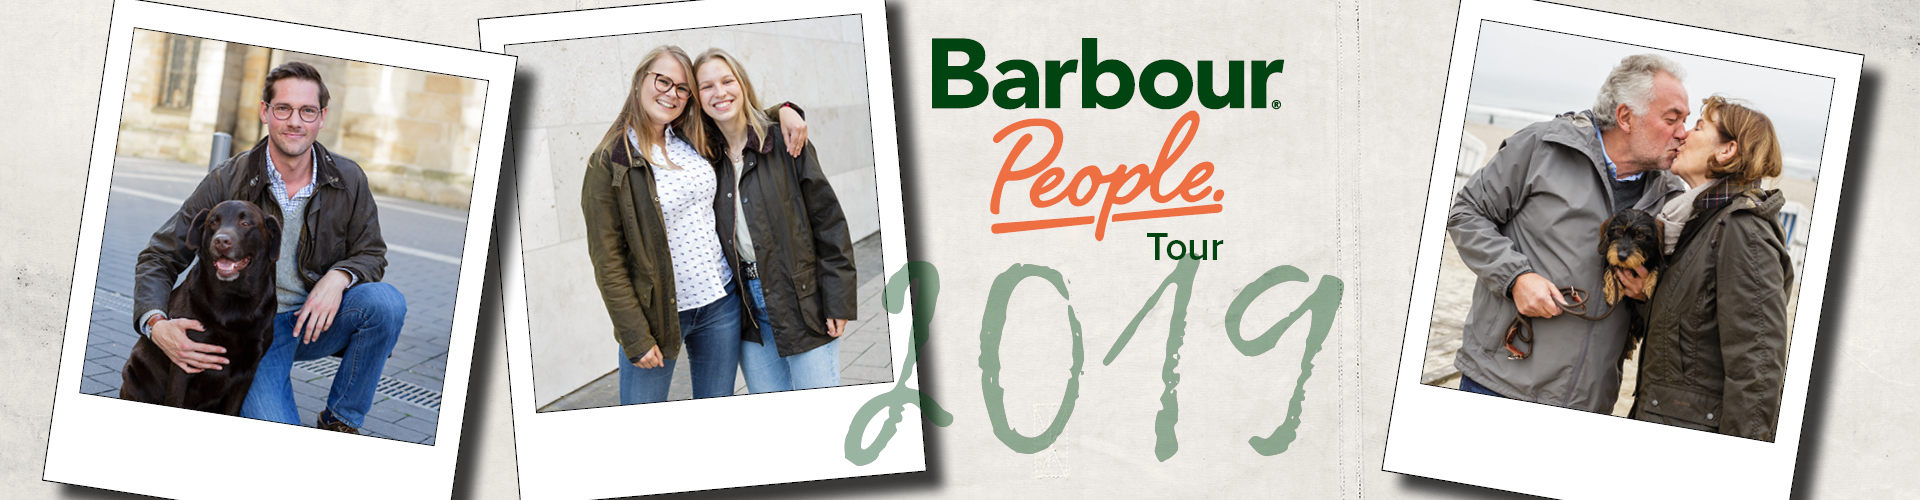 #BarbourPeople: Store Tour 2019